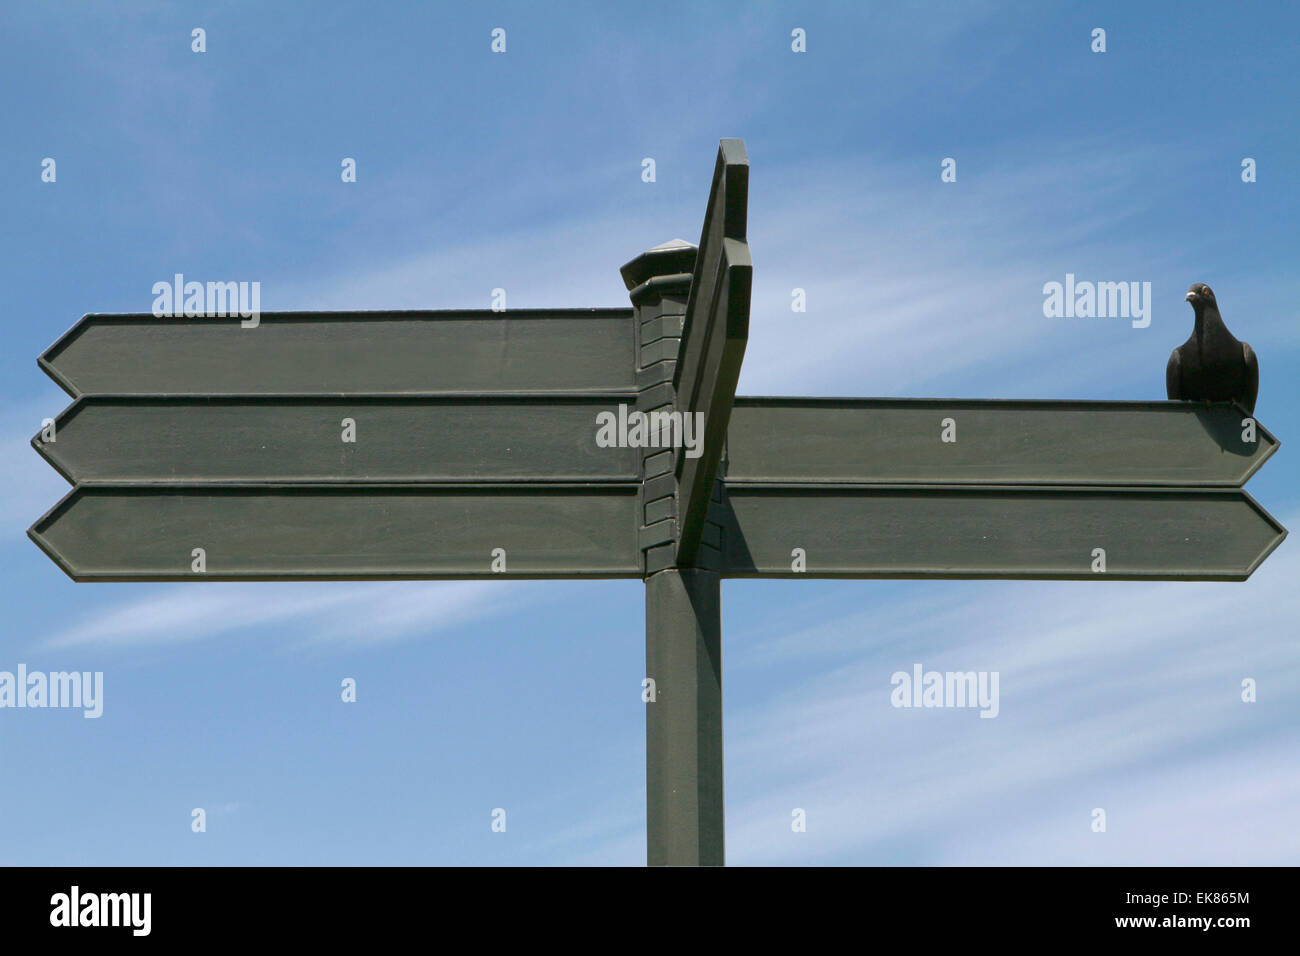 Blank Directional Sign in London Stock Photo